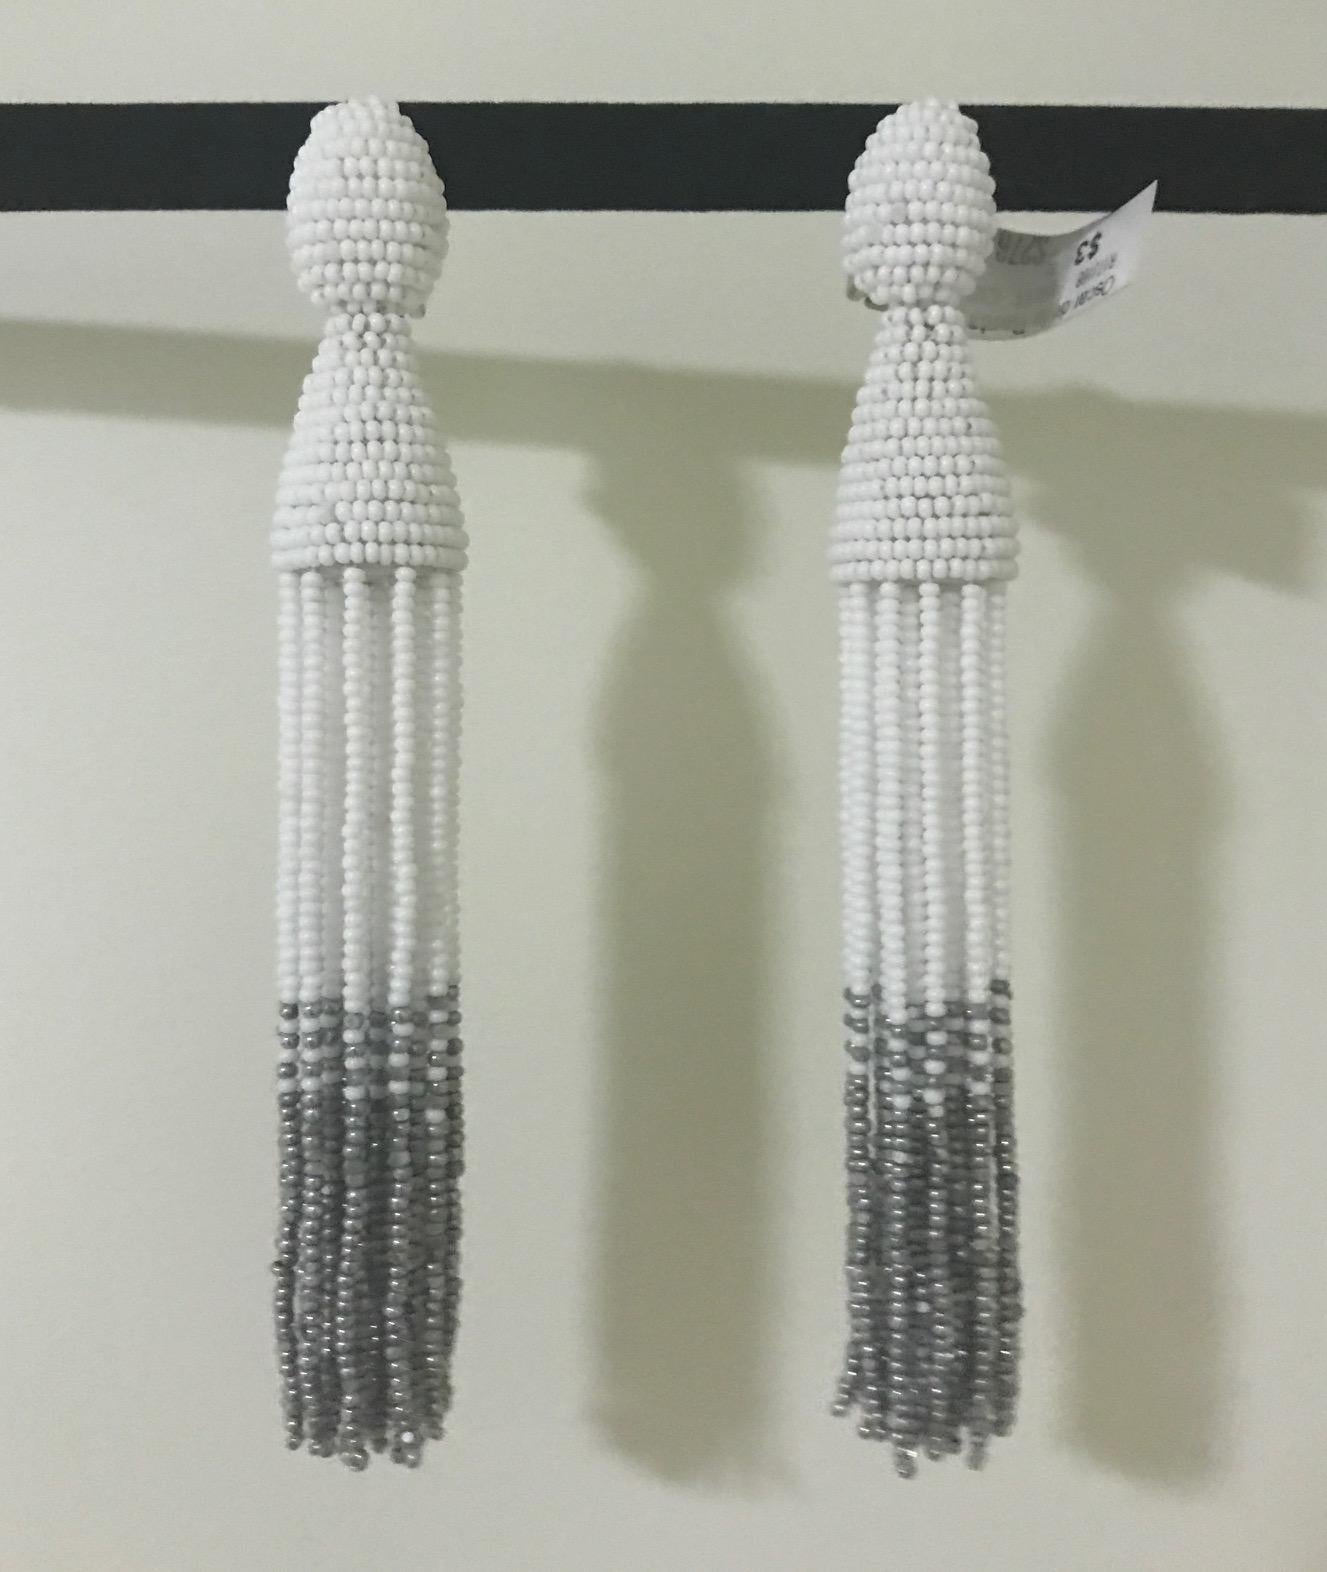 Oscar de la Renta white and muted silver beaded tassel earrings. Clip backs with clear rubber inserts for comfort.

Measure approximately 5 1/2